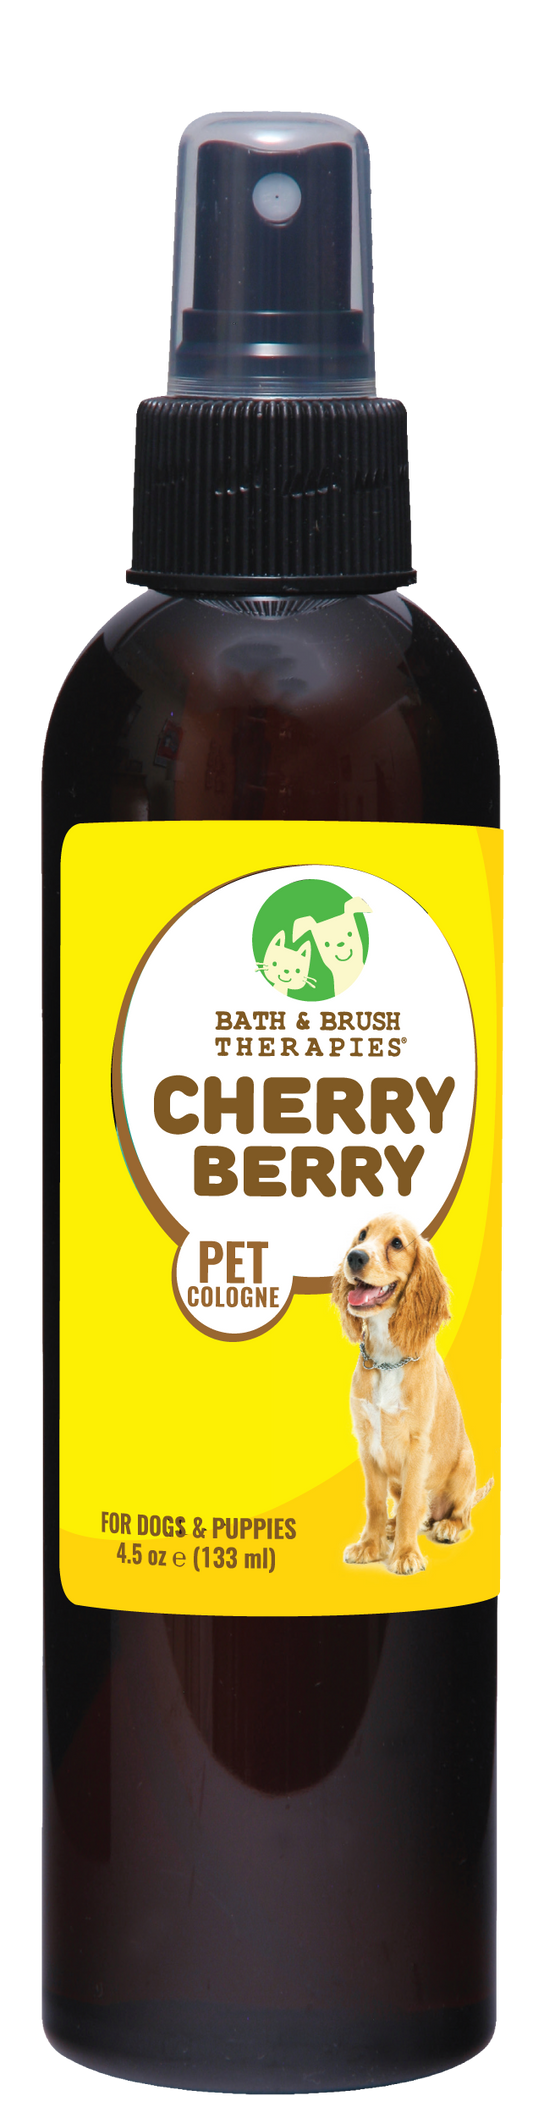 Cherry Berry Pet Cologne | Bath & Brush Therapies®